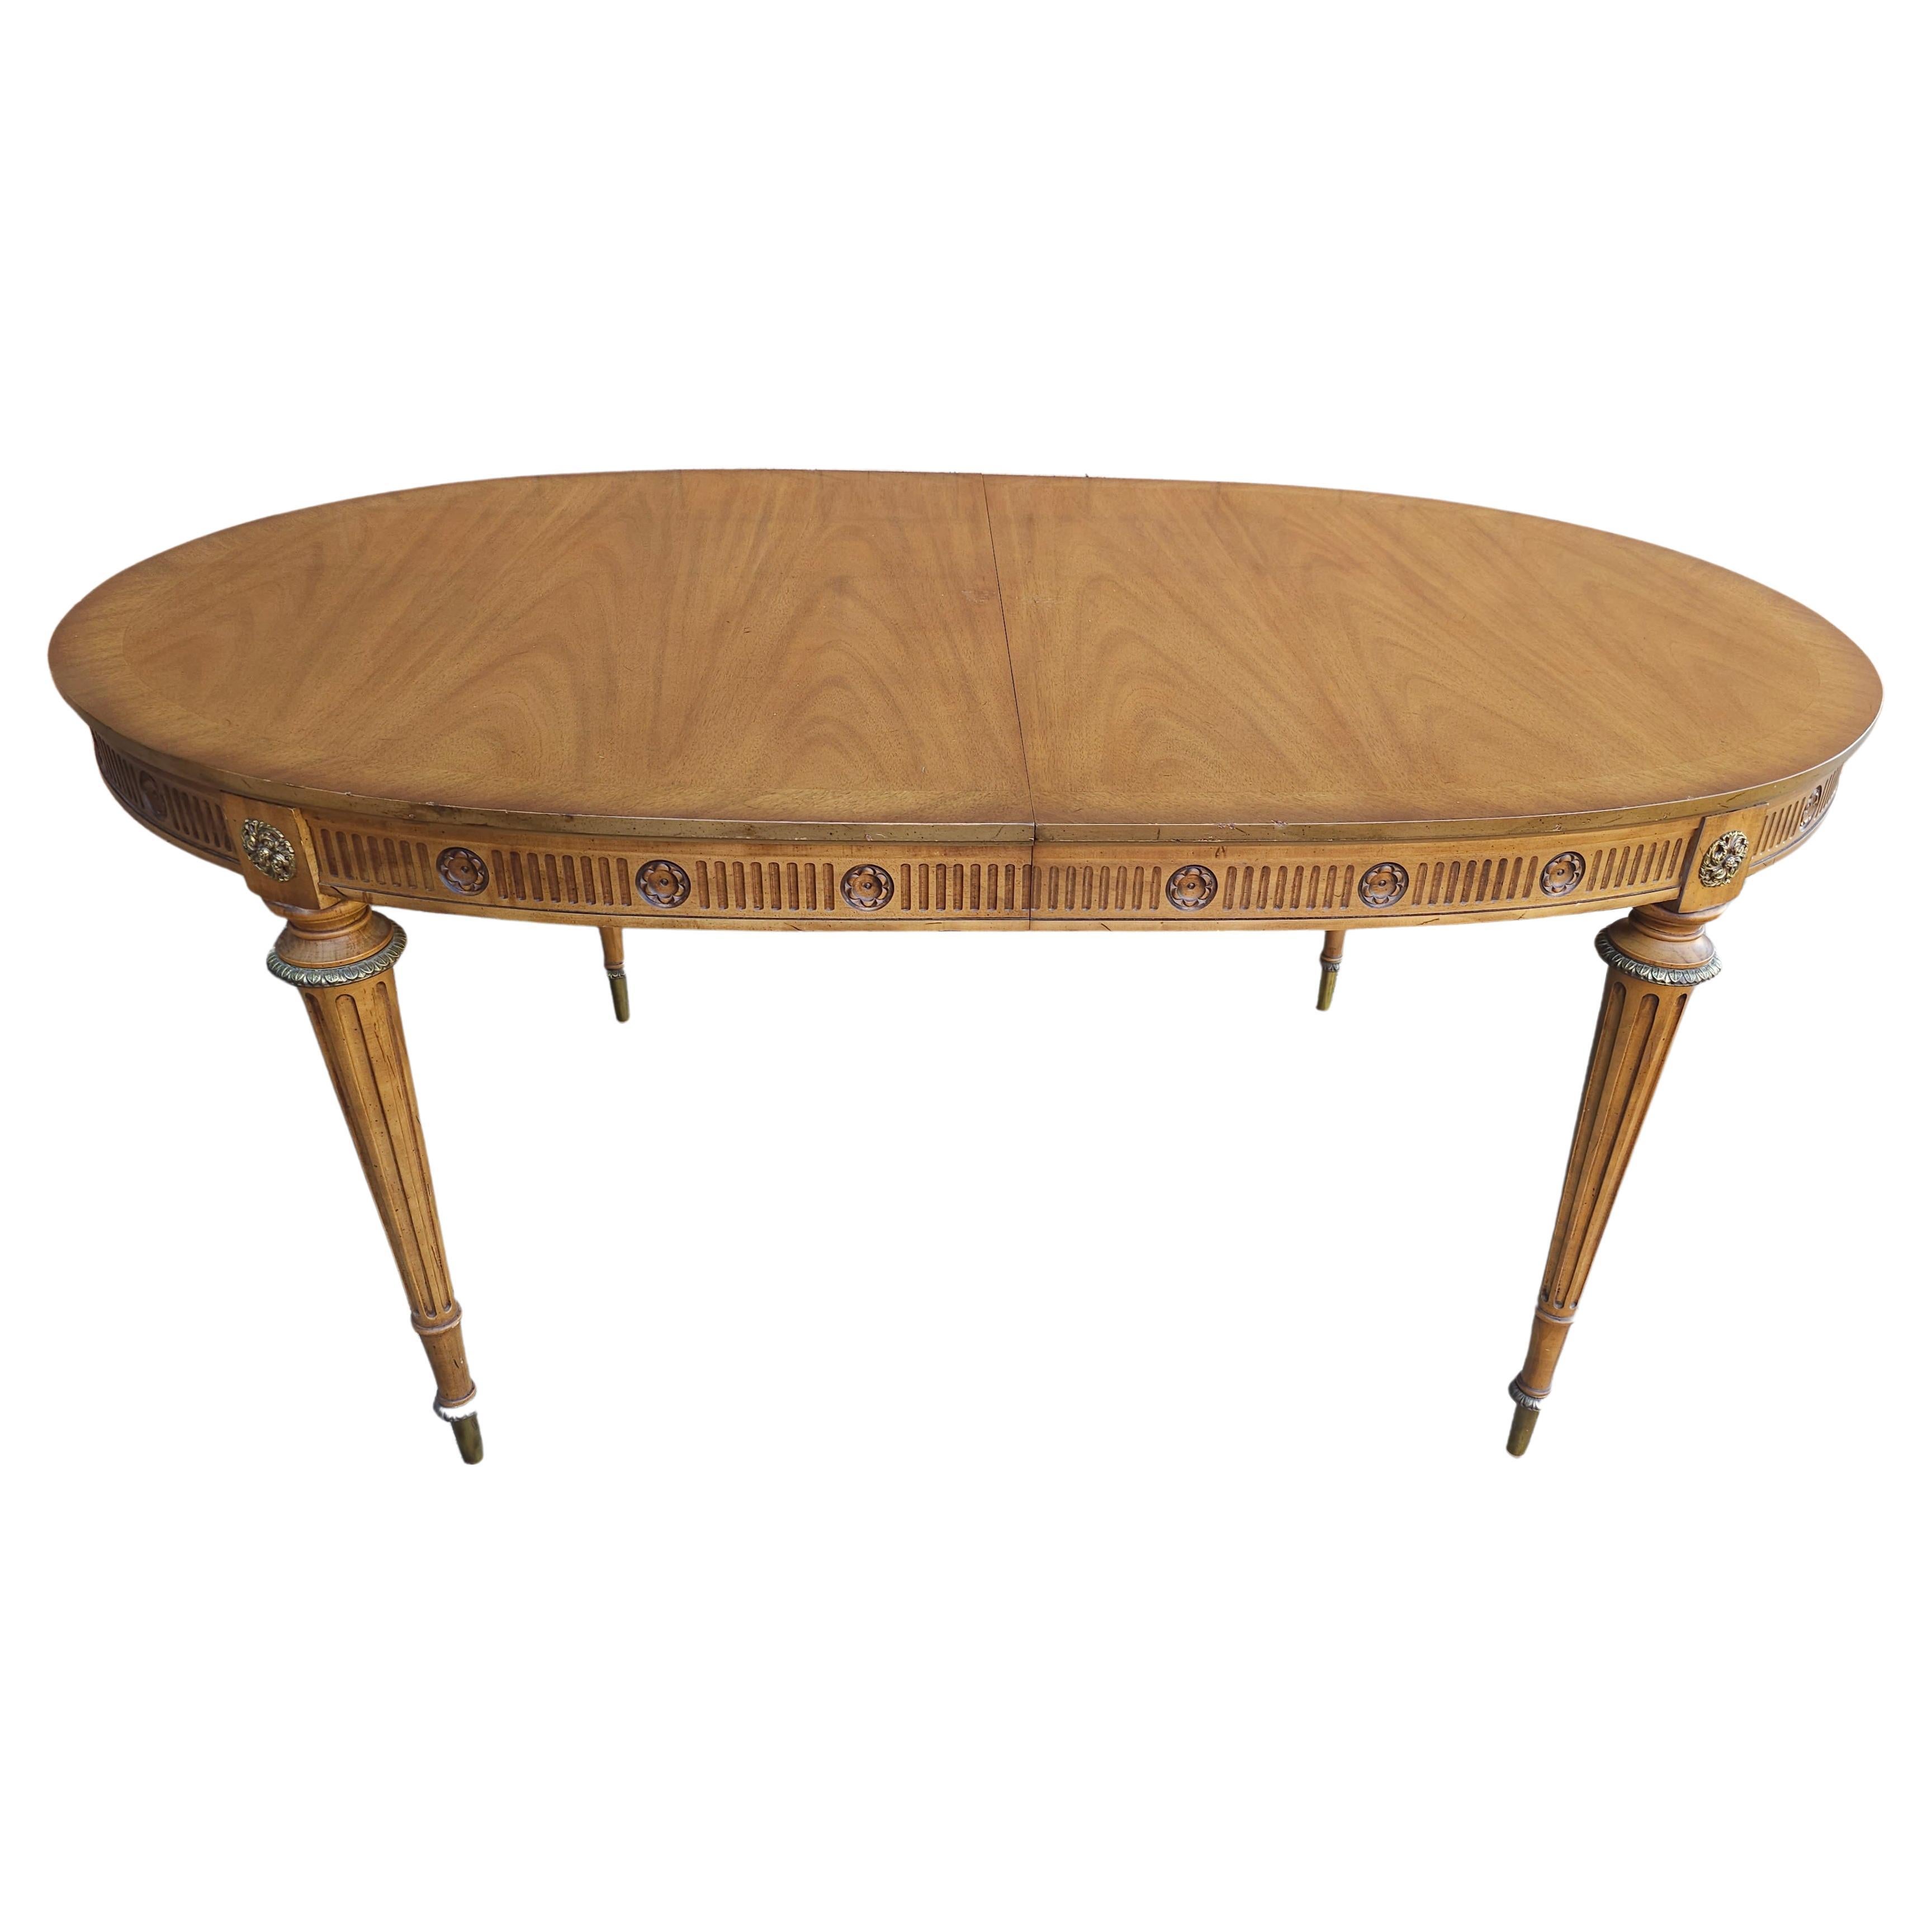 Carved Louis XVI Brass Mounted French Walnut Oval Extension Dining Table W/ 2 Leaves For Sale